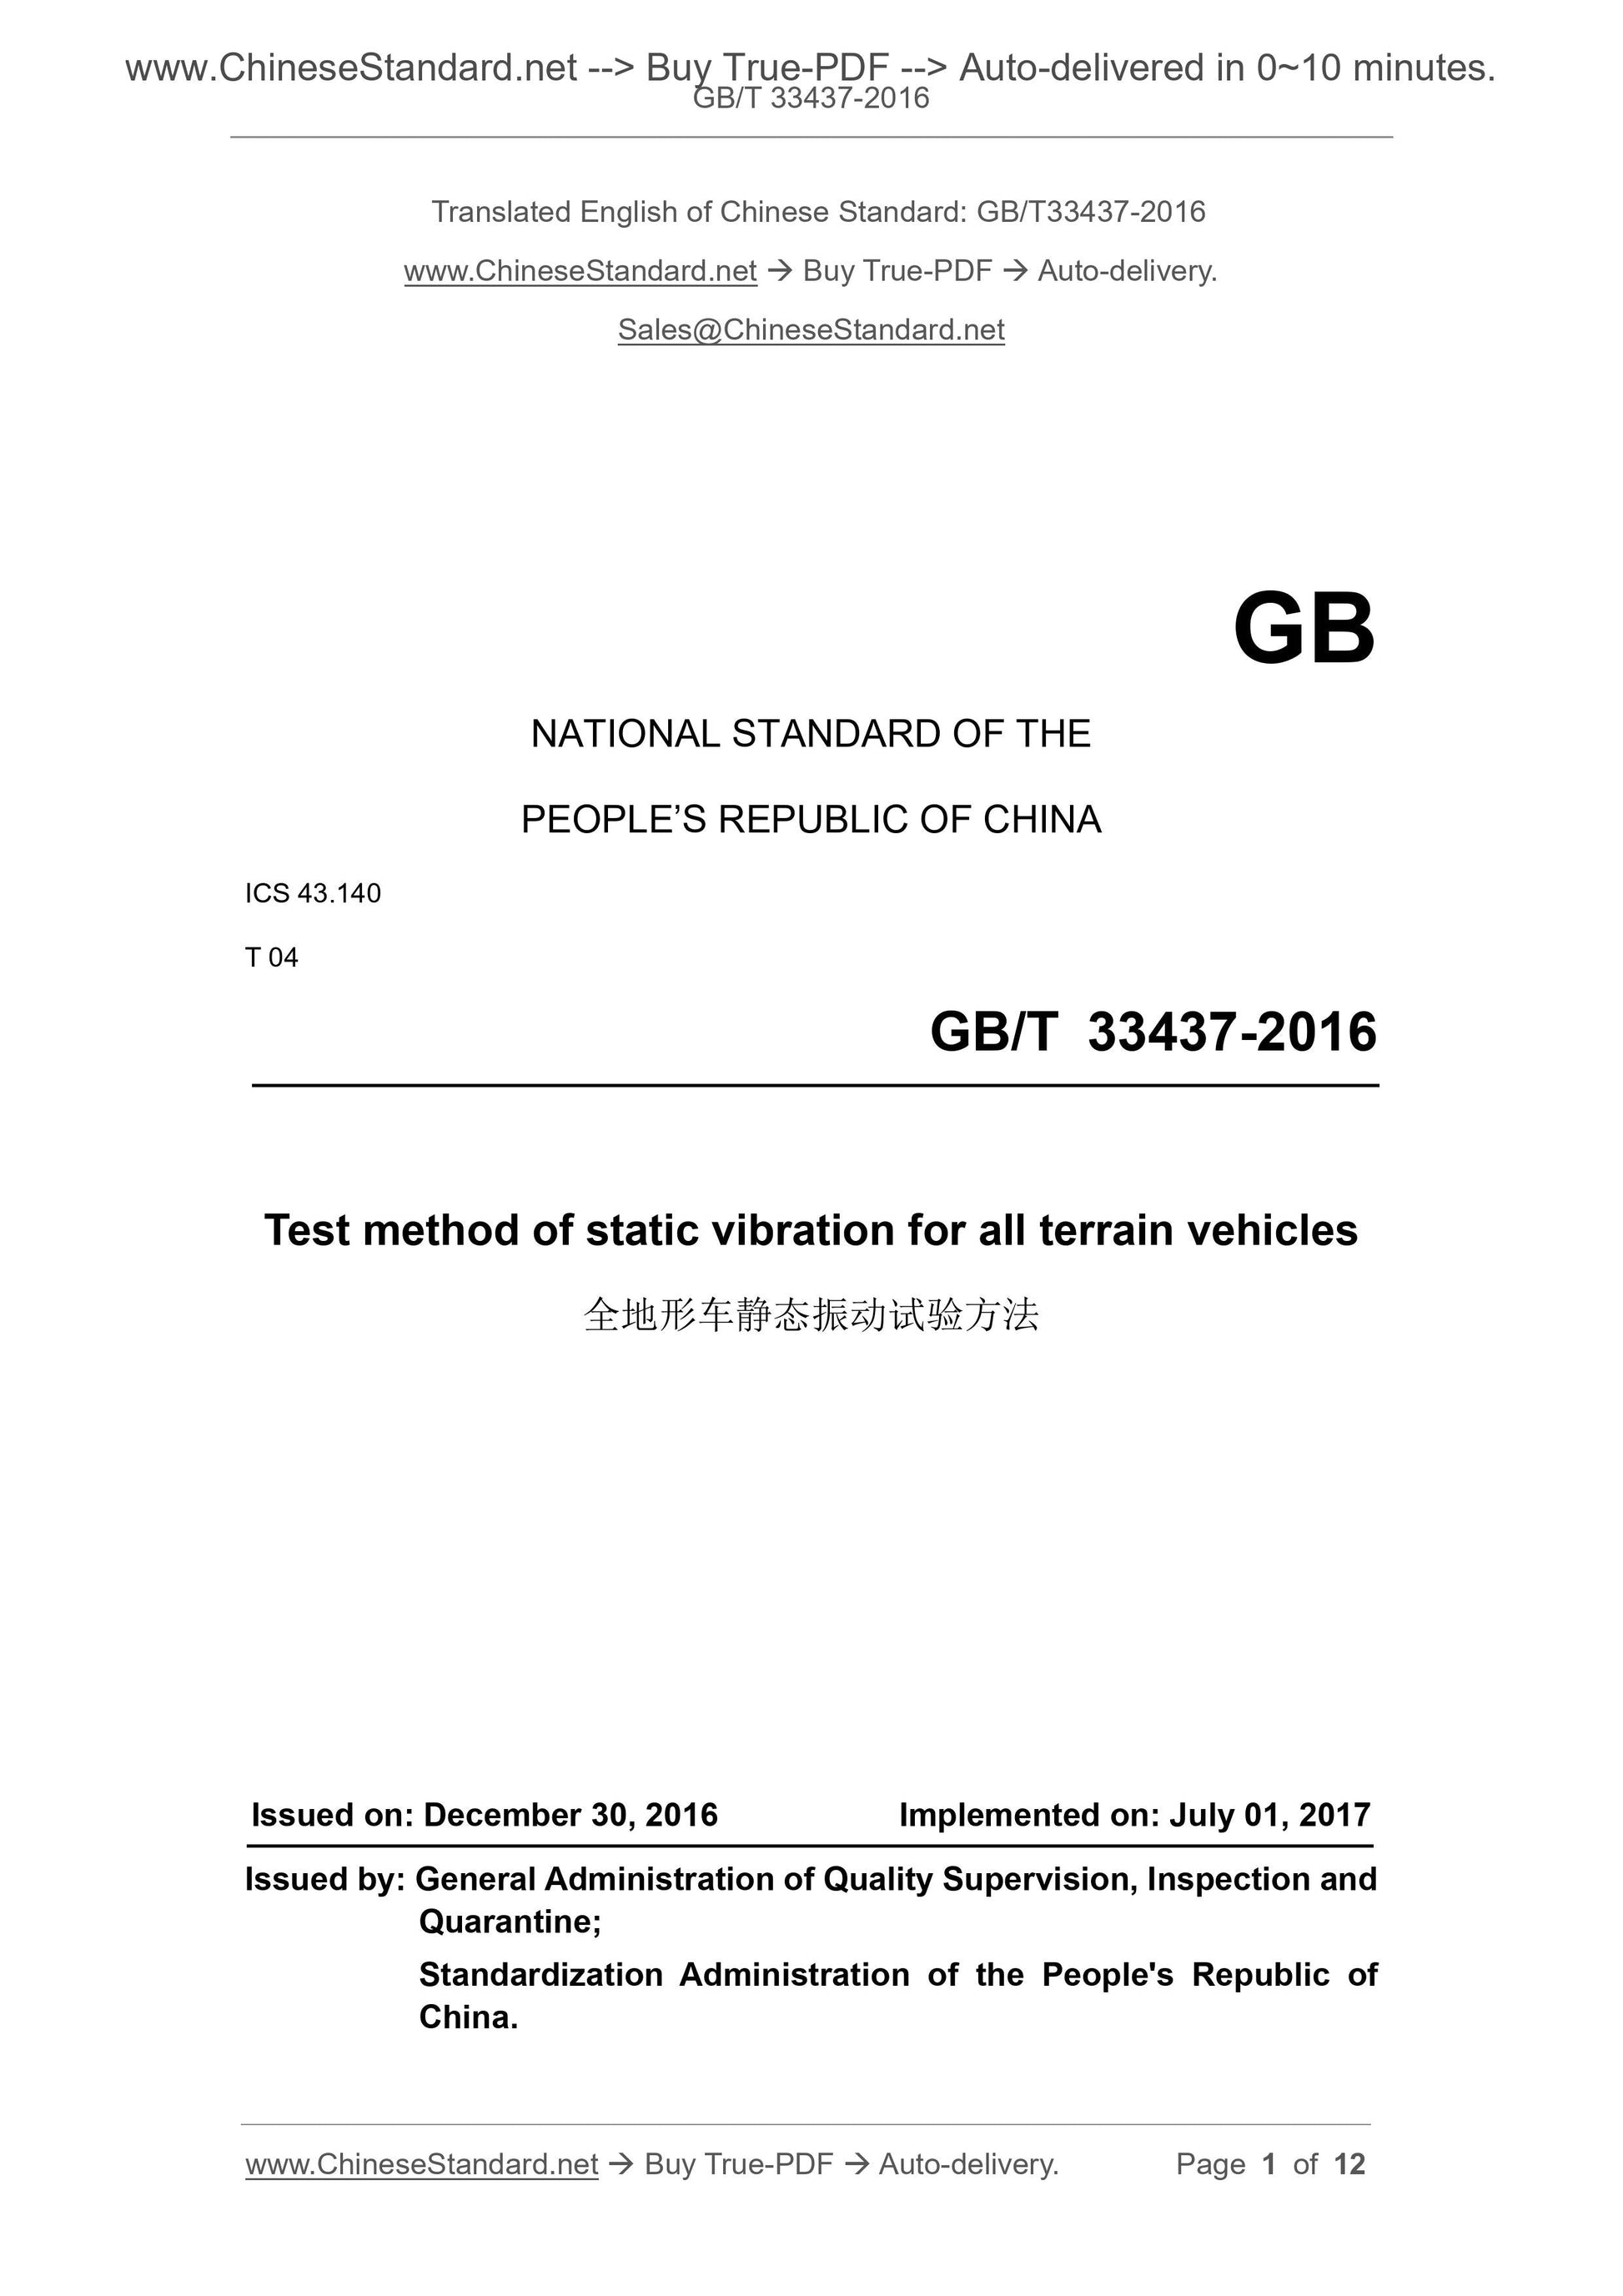 GB/T 33437-2016 Page 1